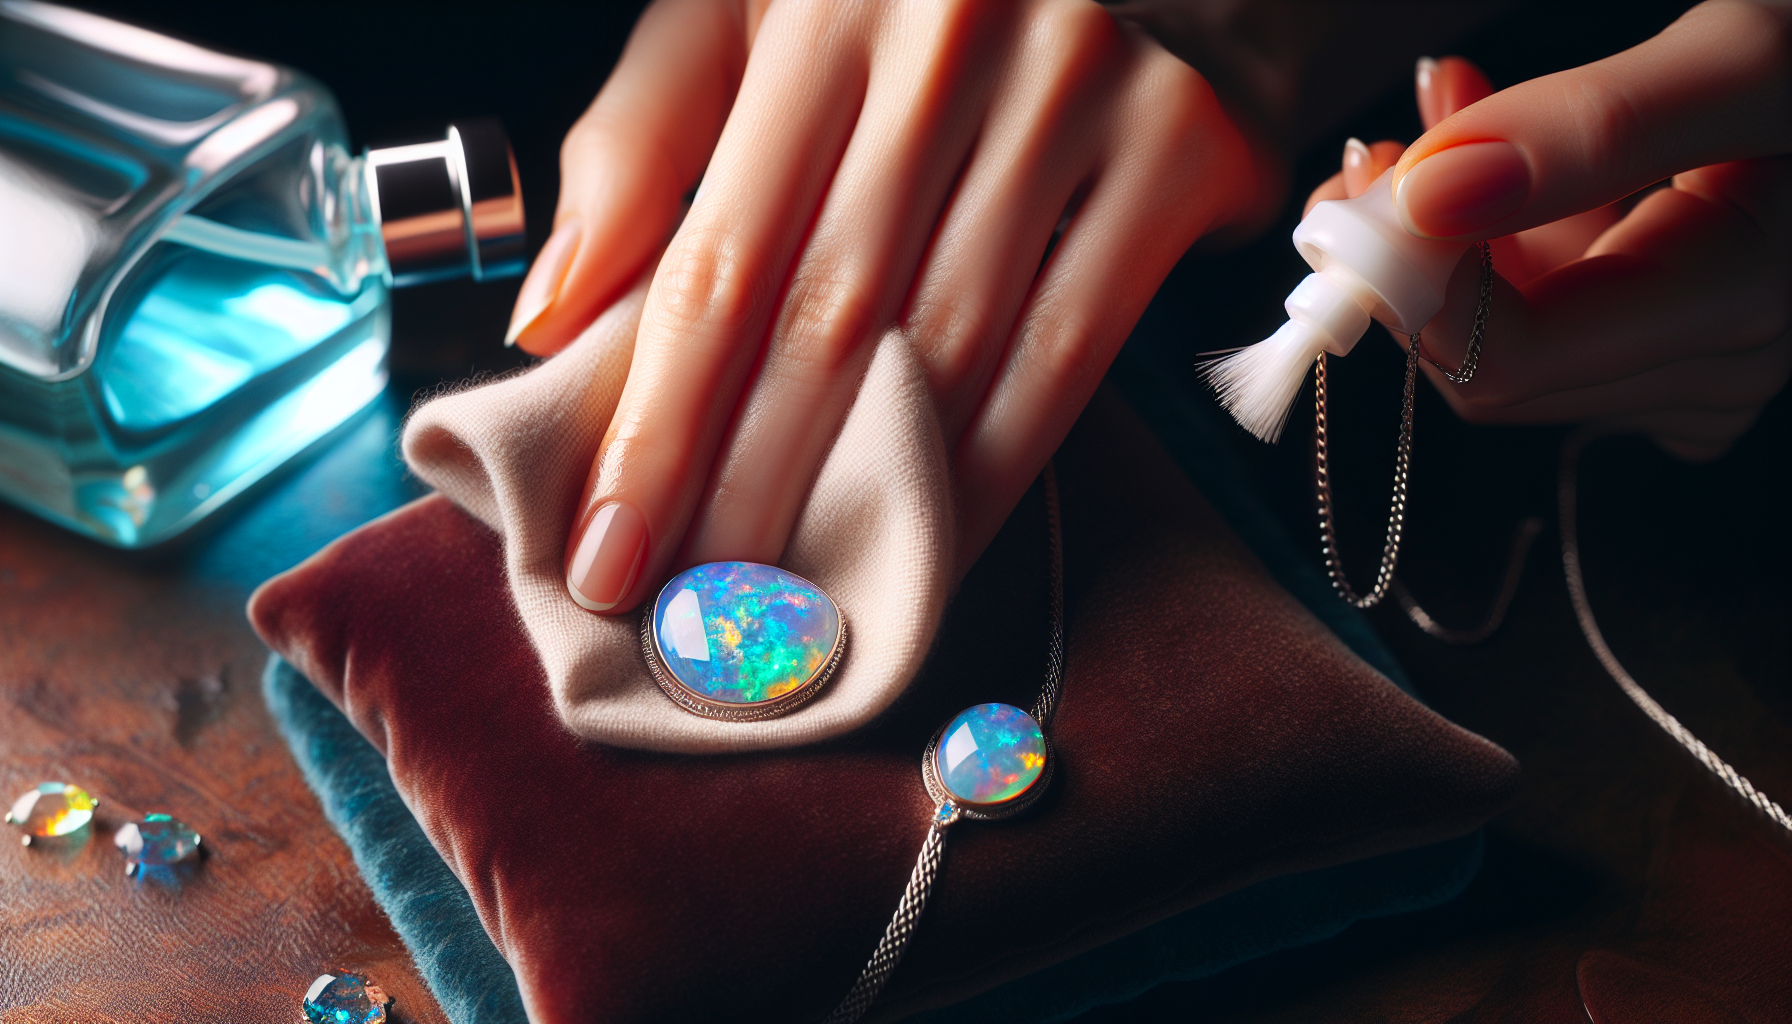 Opal jewelry being cleaned with a damp cloth